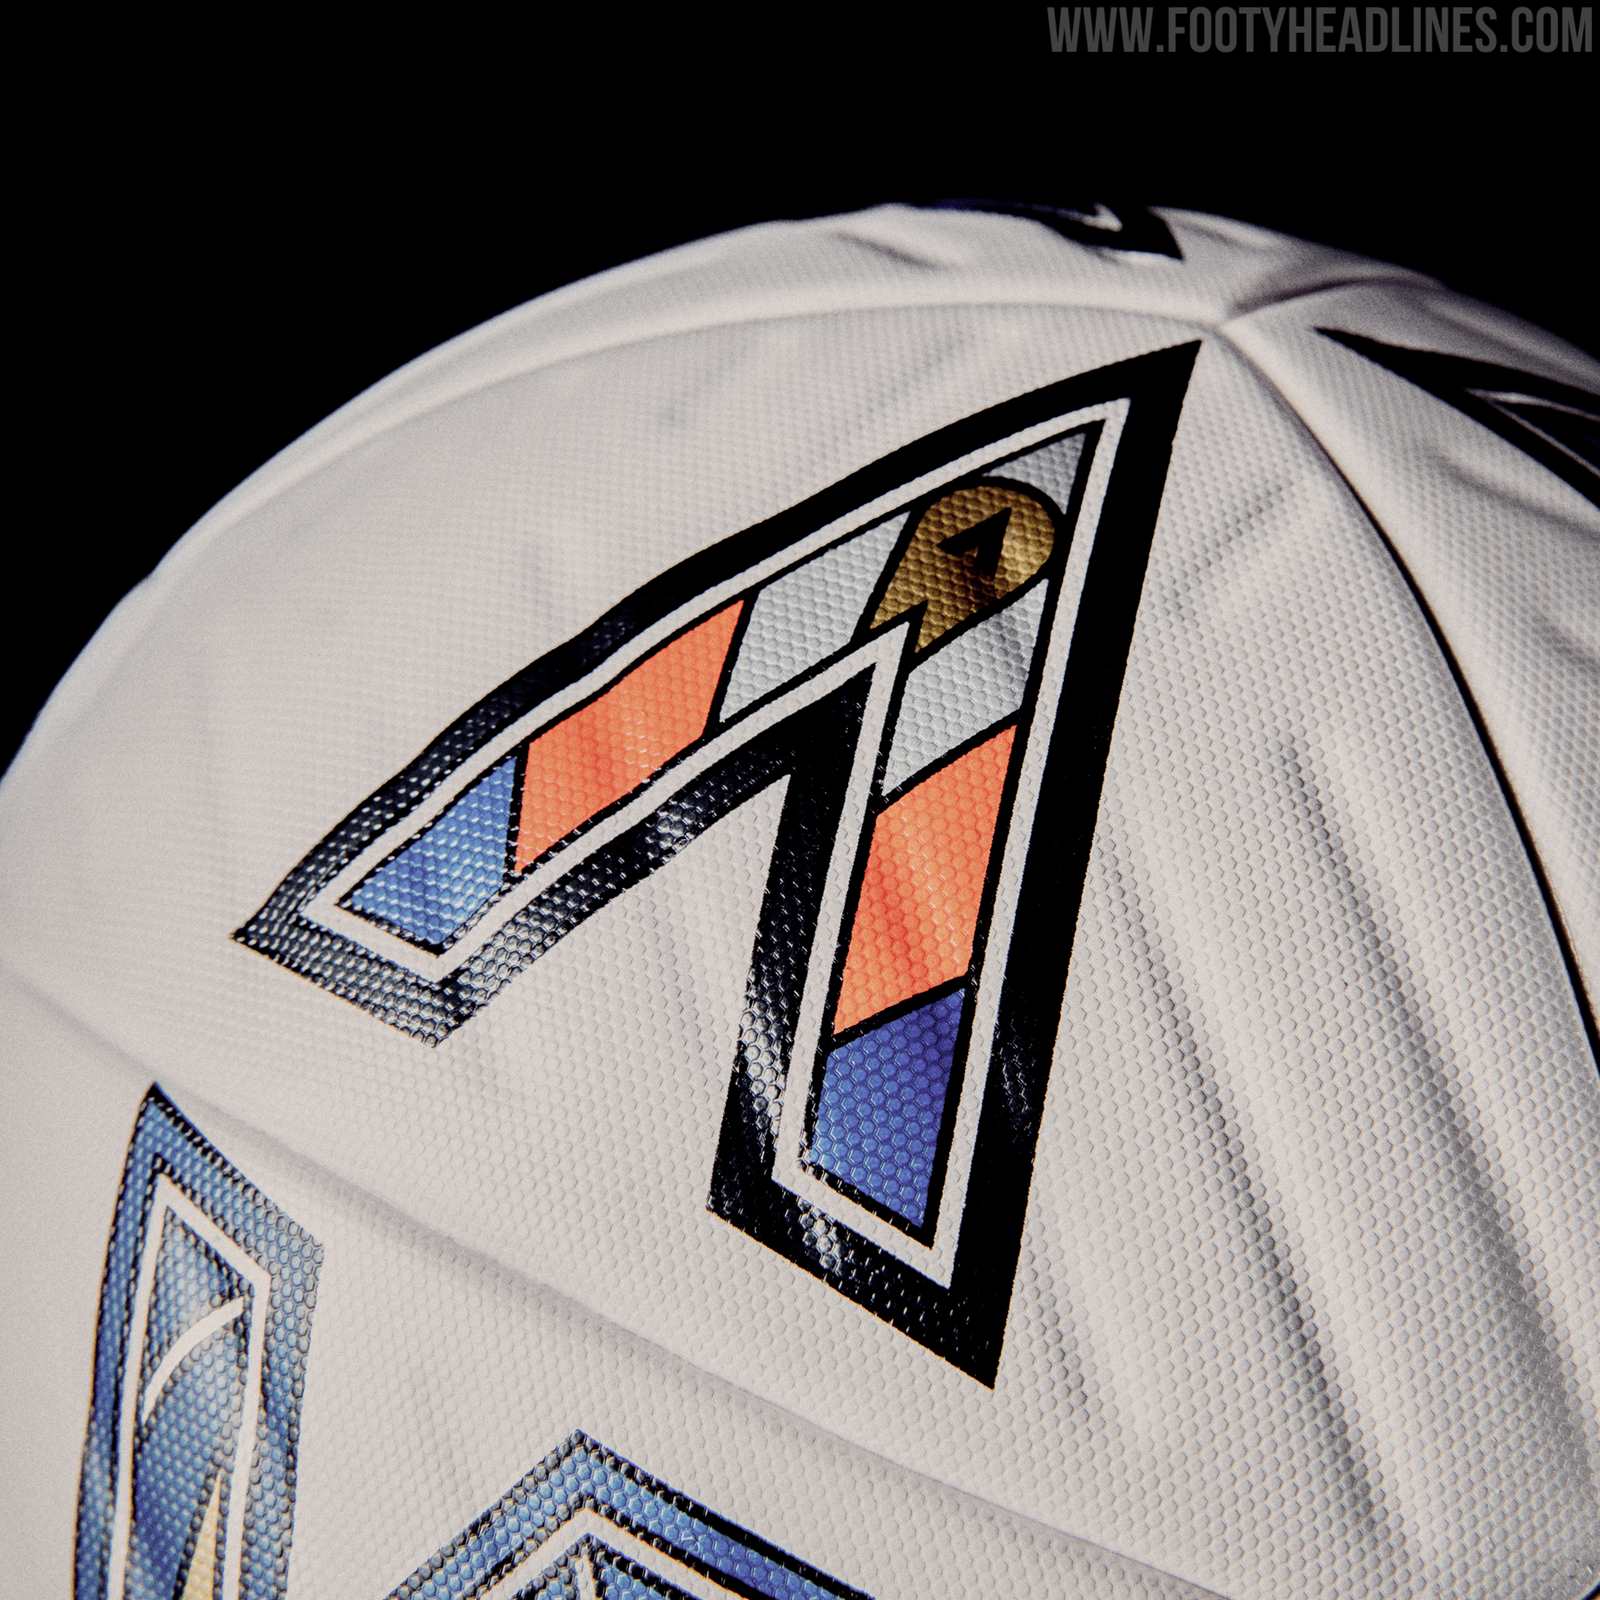 Puma EFL 21-22 Ball Revealed - No More Mitre After 45 Years - Footy  Headlines